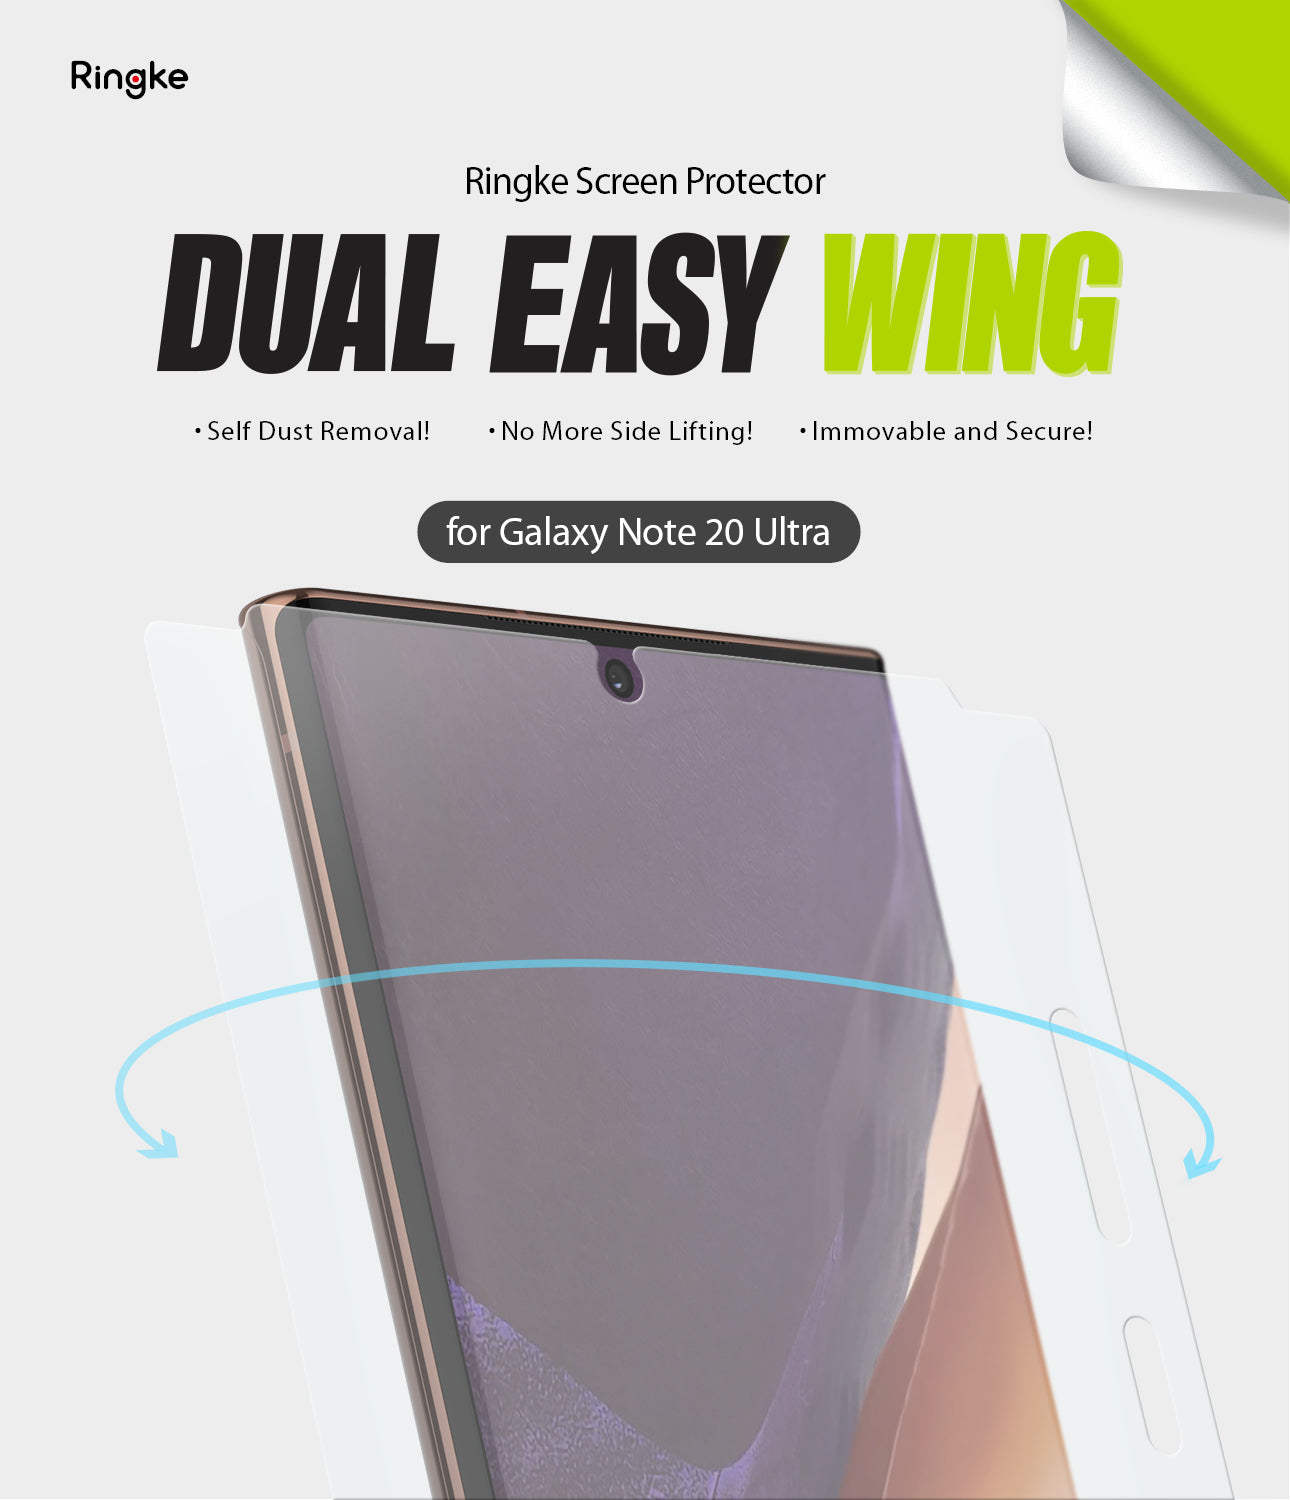 samsung galaxy note 20 ultra screen protector - ringke dual easy film wing